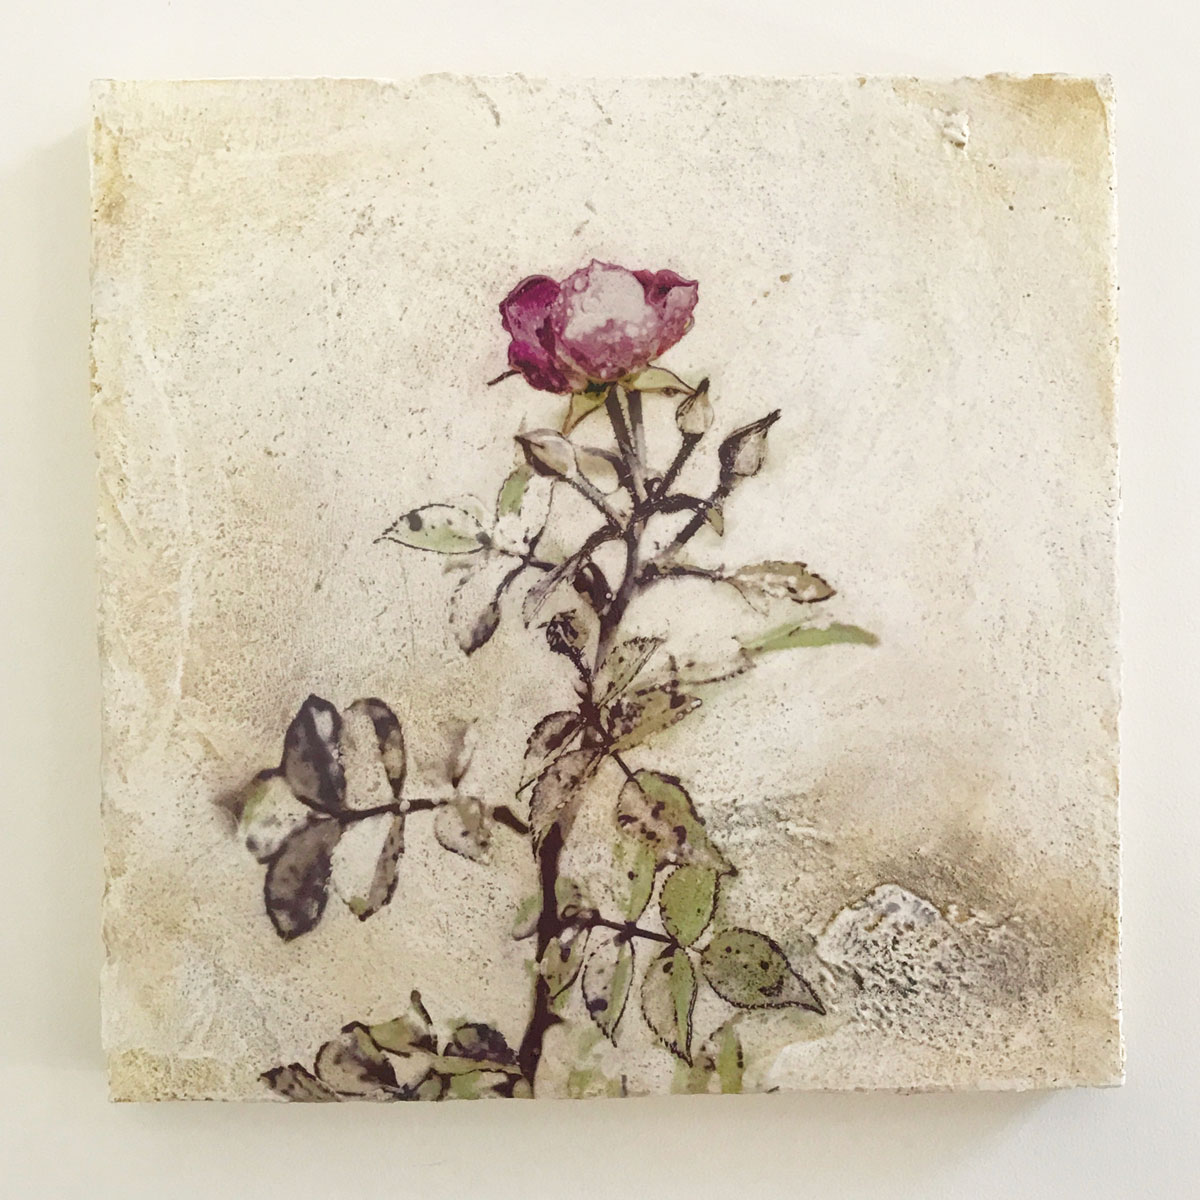 One of my botanical works on Venetian plaster. 12x12", available in my shop.